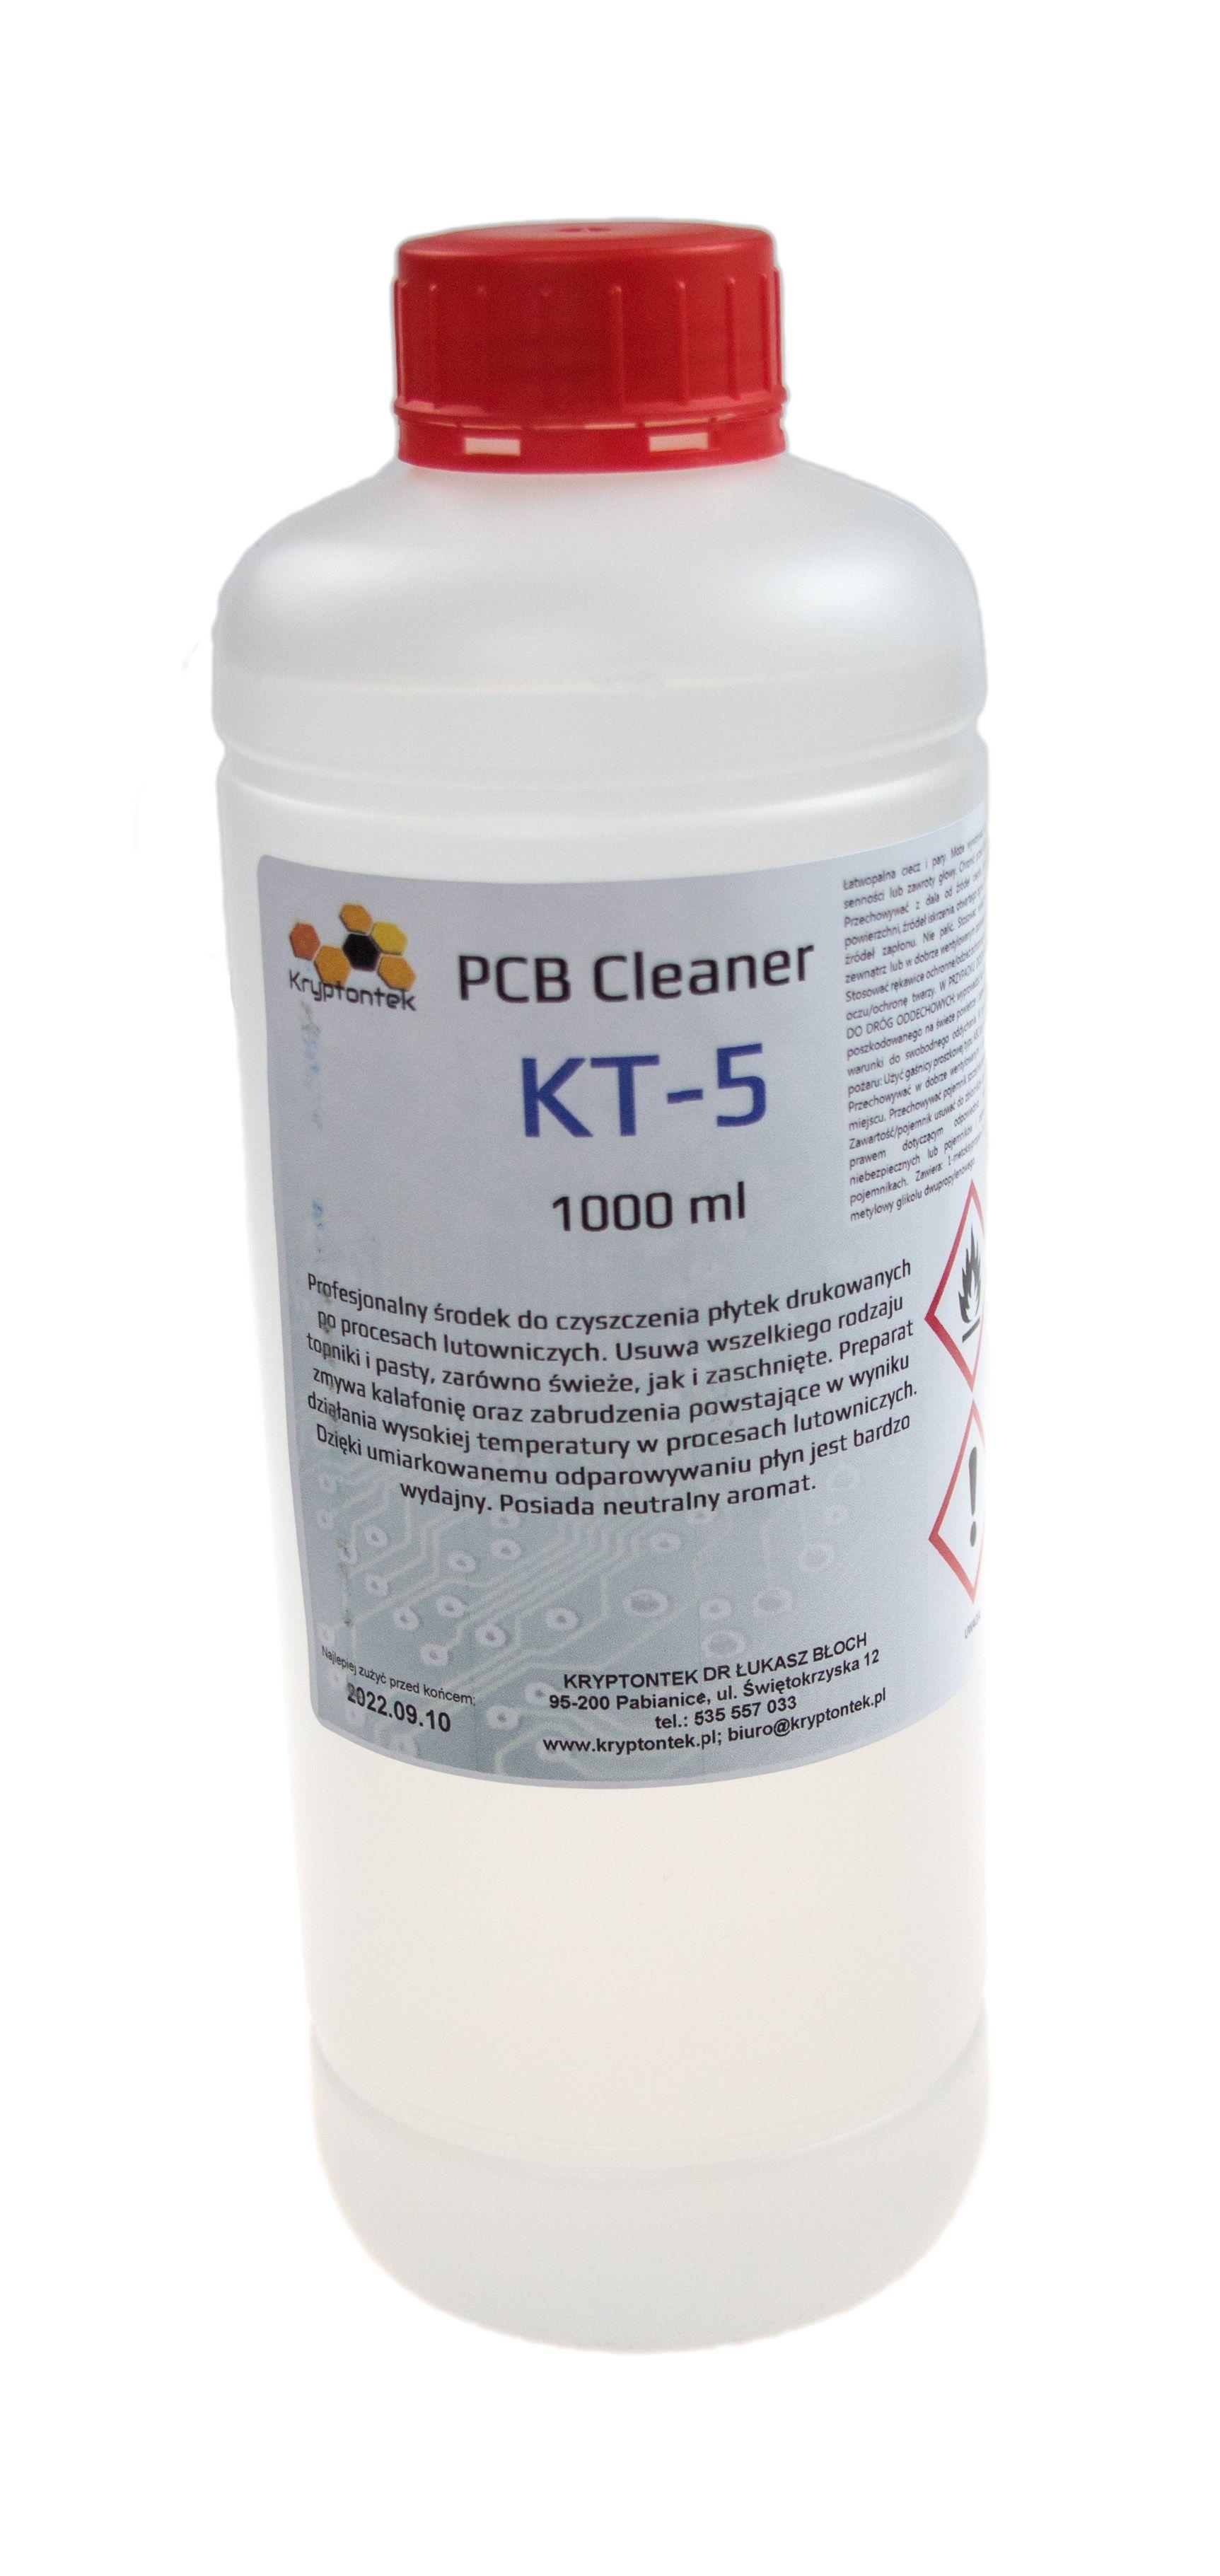 PCB Cleaner KT-5 1000 ml with a screw cap